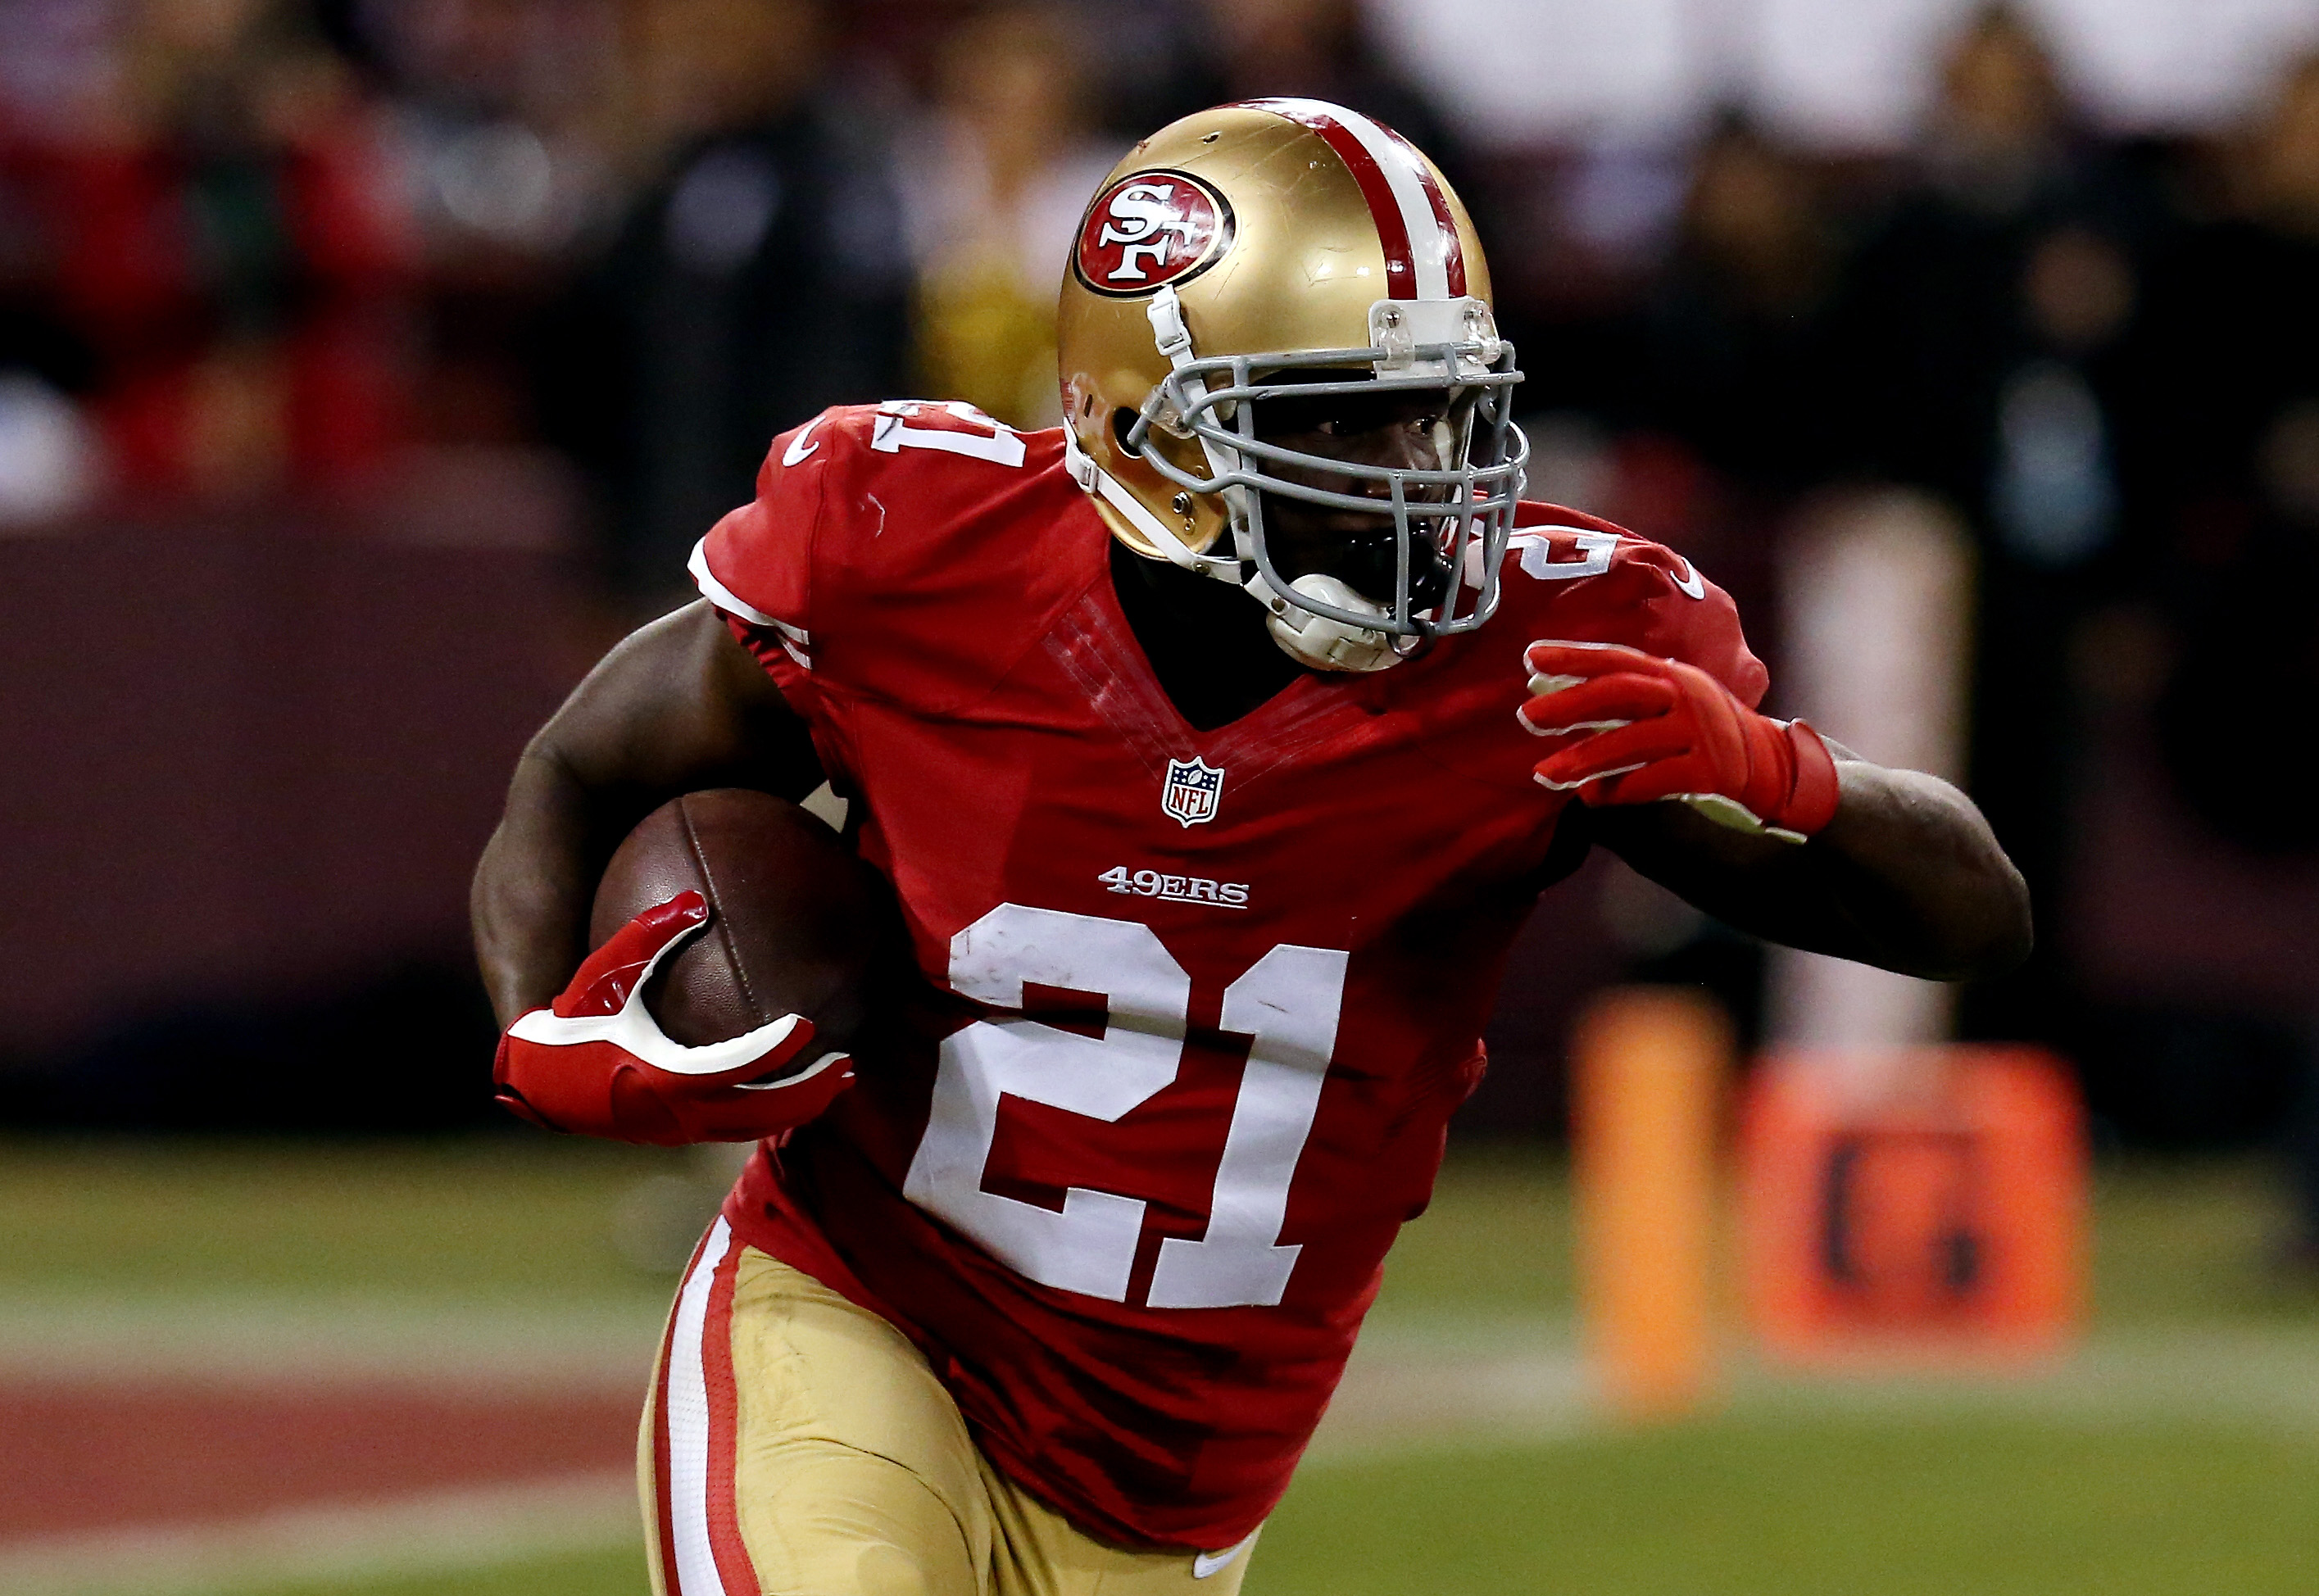 AP Sources: RB Frank Gore to leave 49ers for Eagles